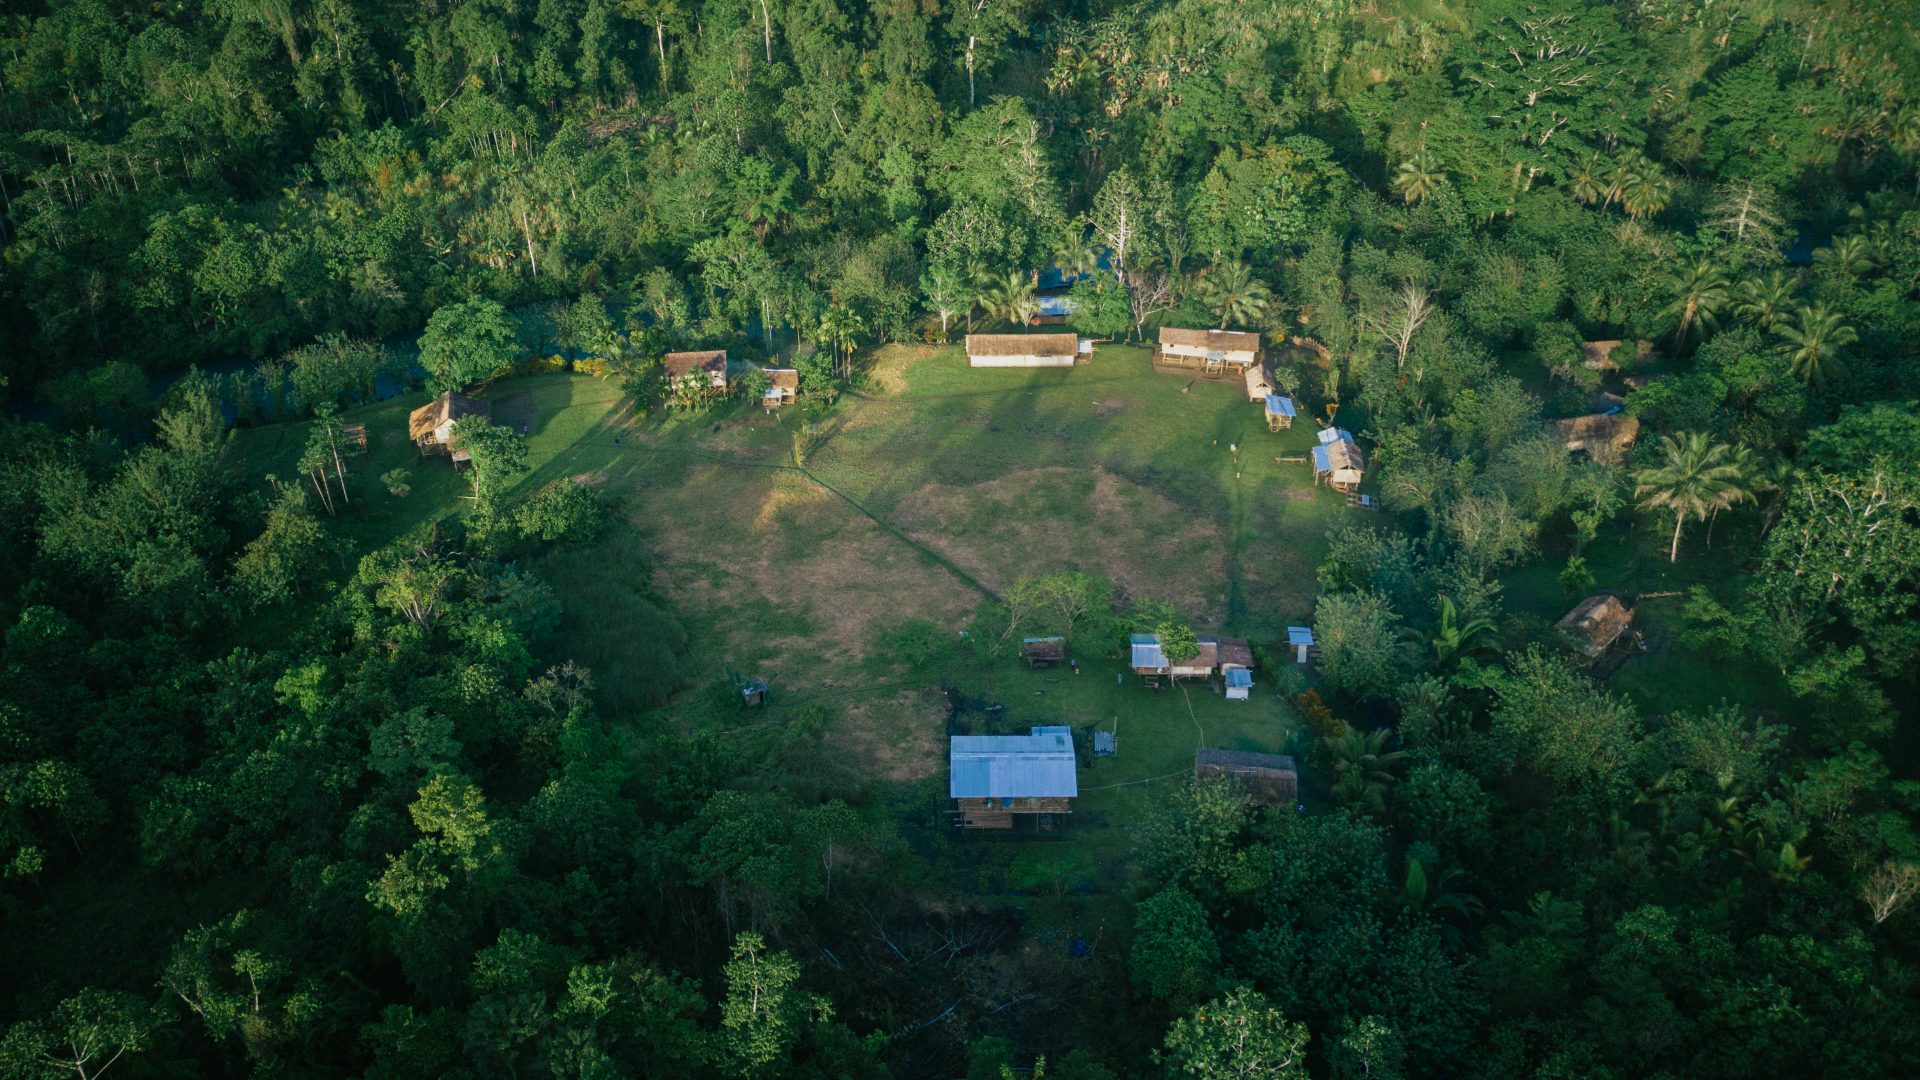 Aerial image of a village clearing surrounded by forest.